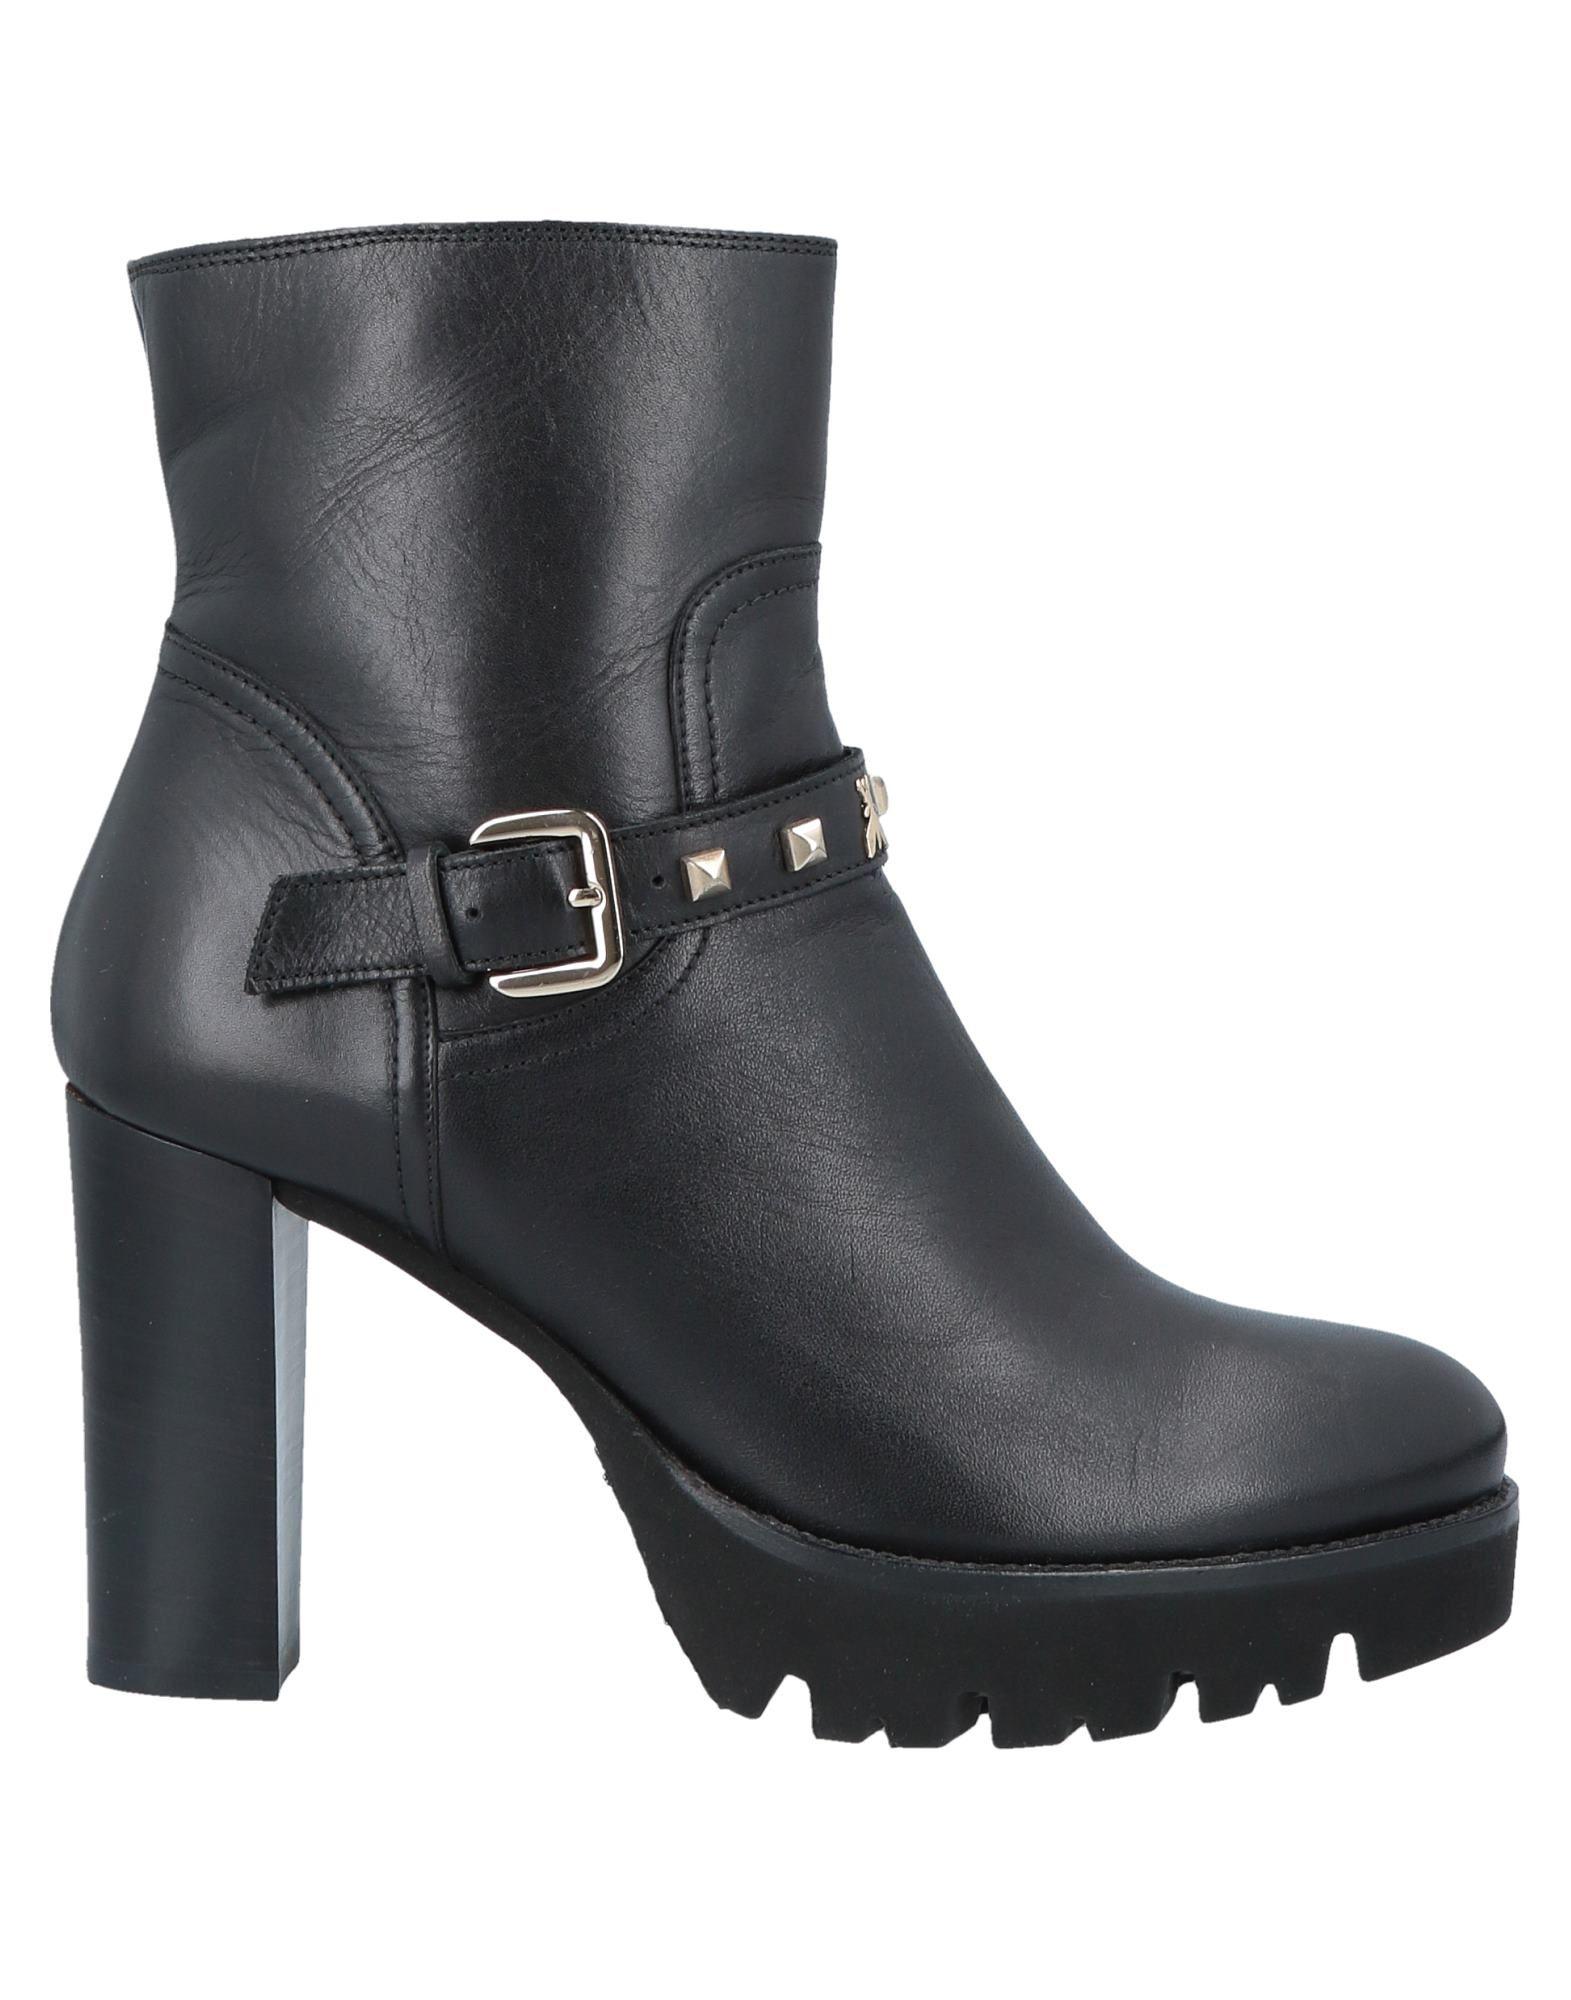 Patrizia Pepe Ankle Boots in Black - Lyst